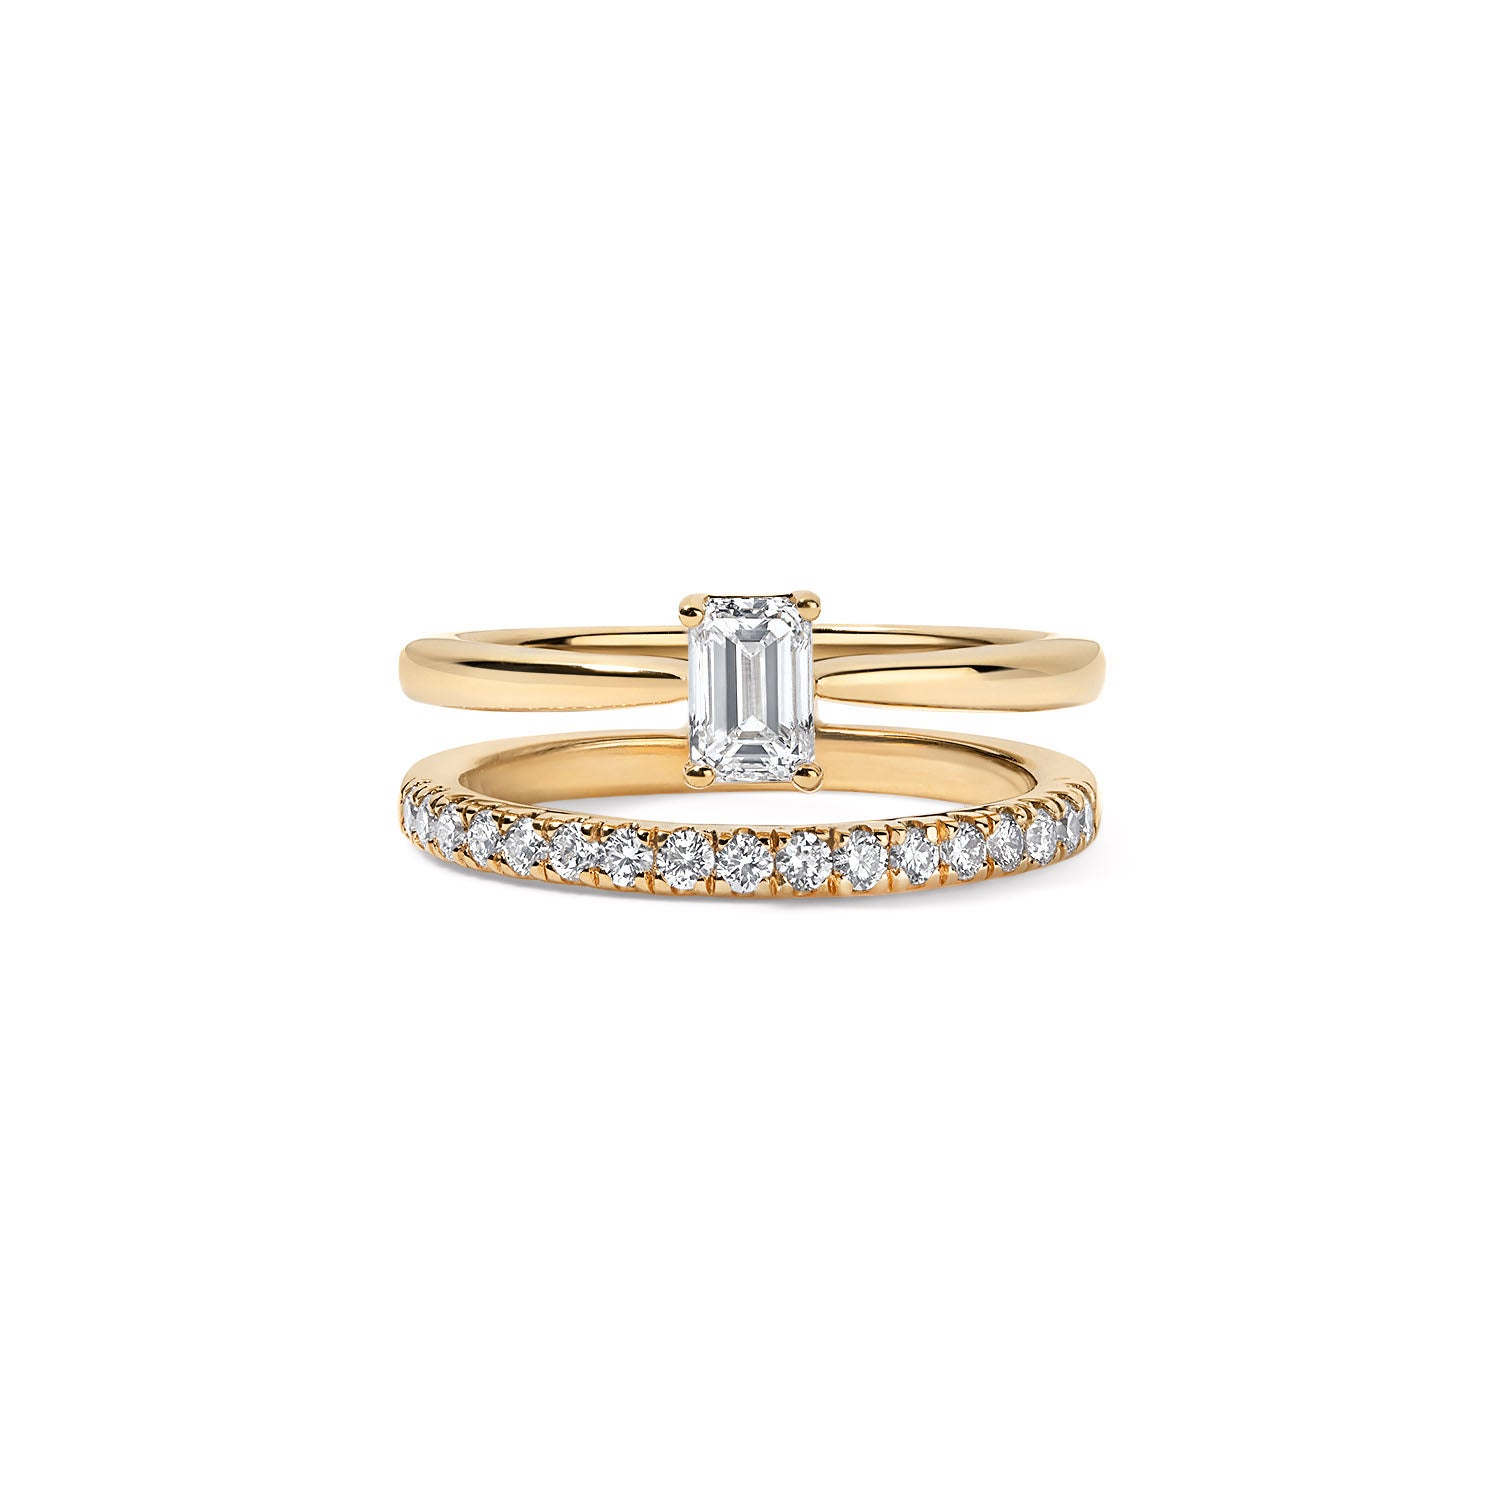 Gold and Diamond Claw Ring with Emerald Cut Diamond